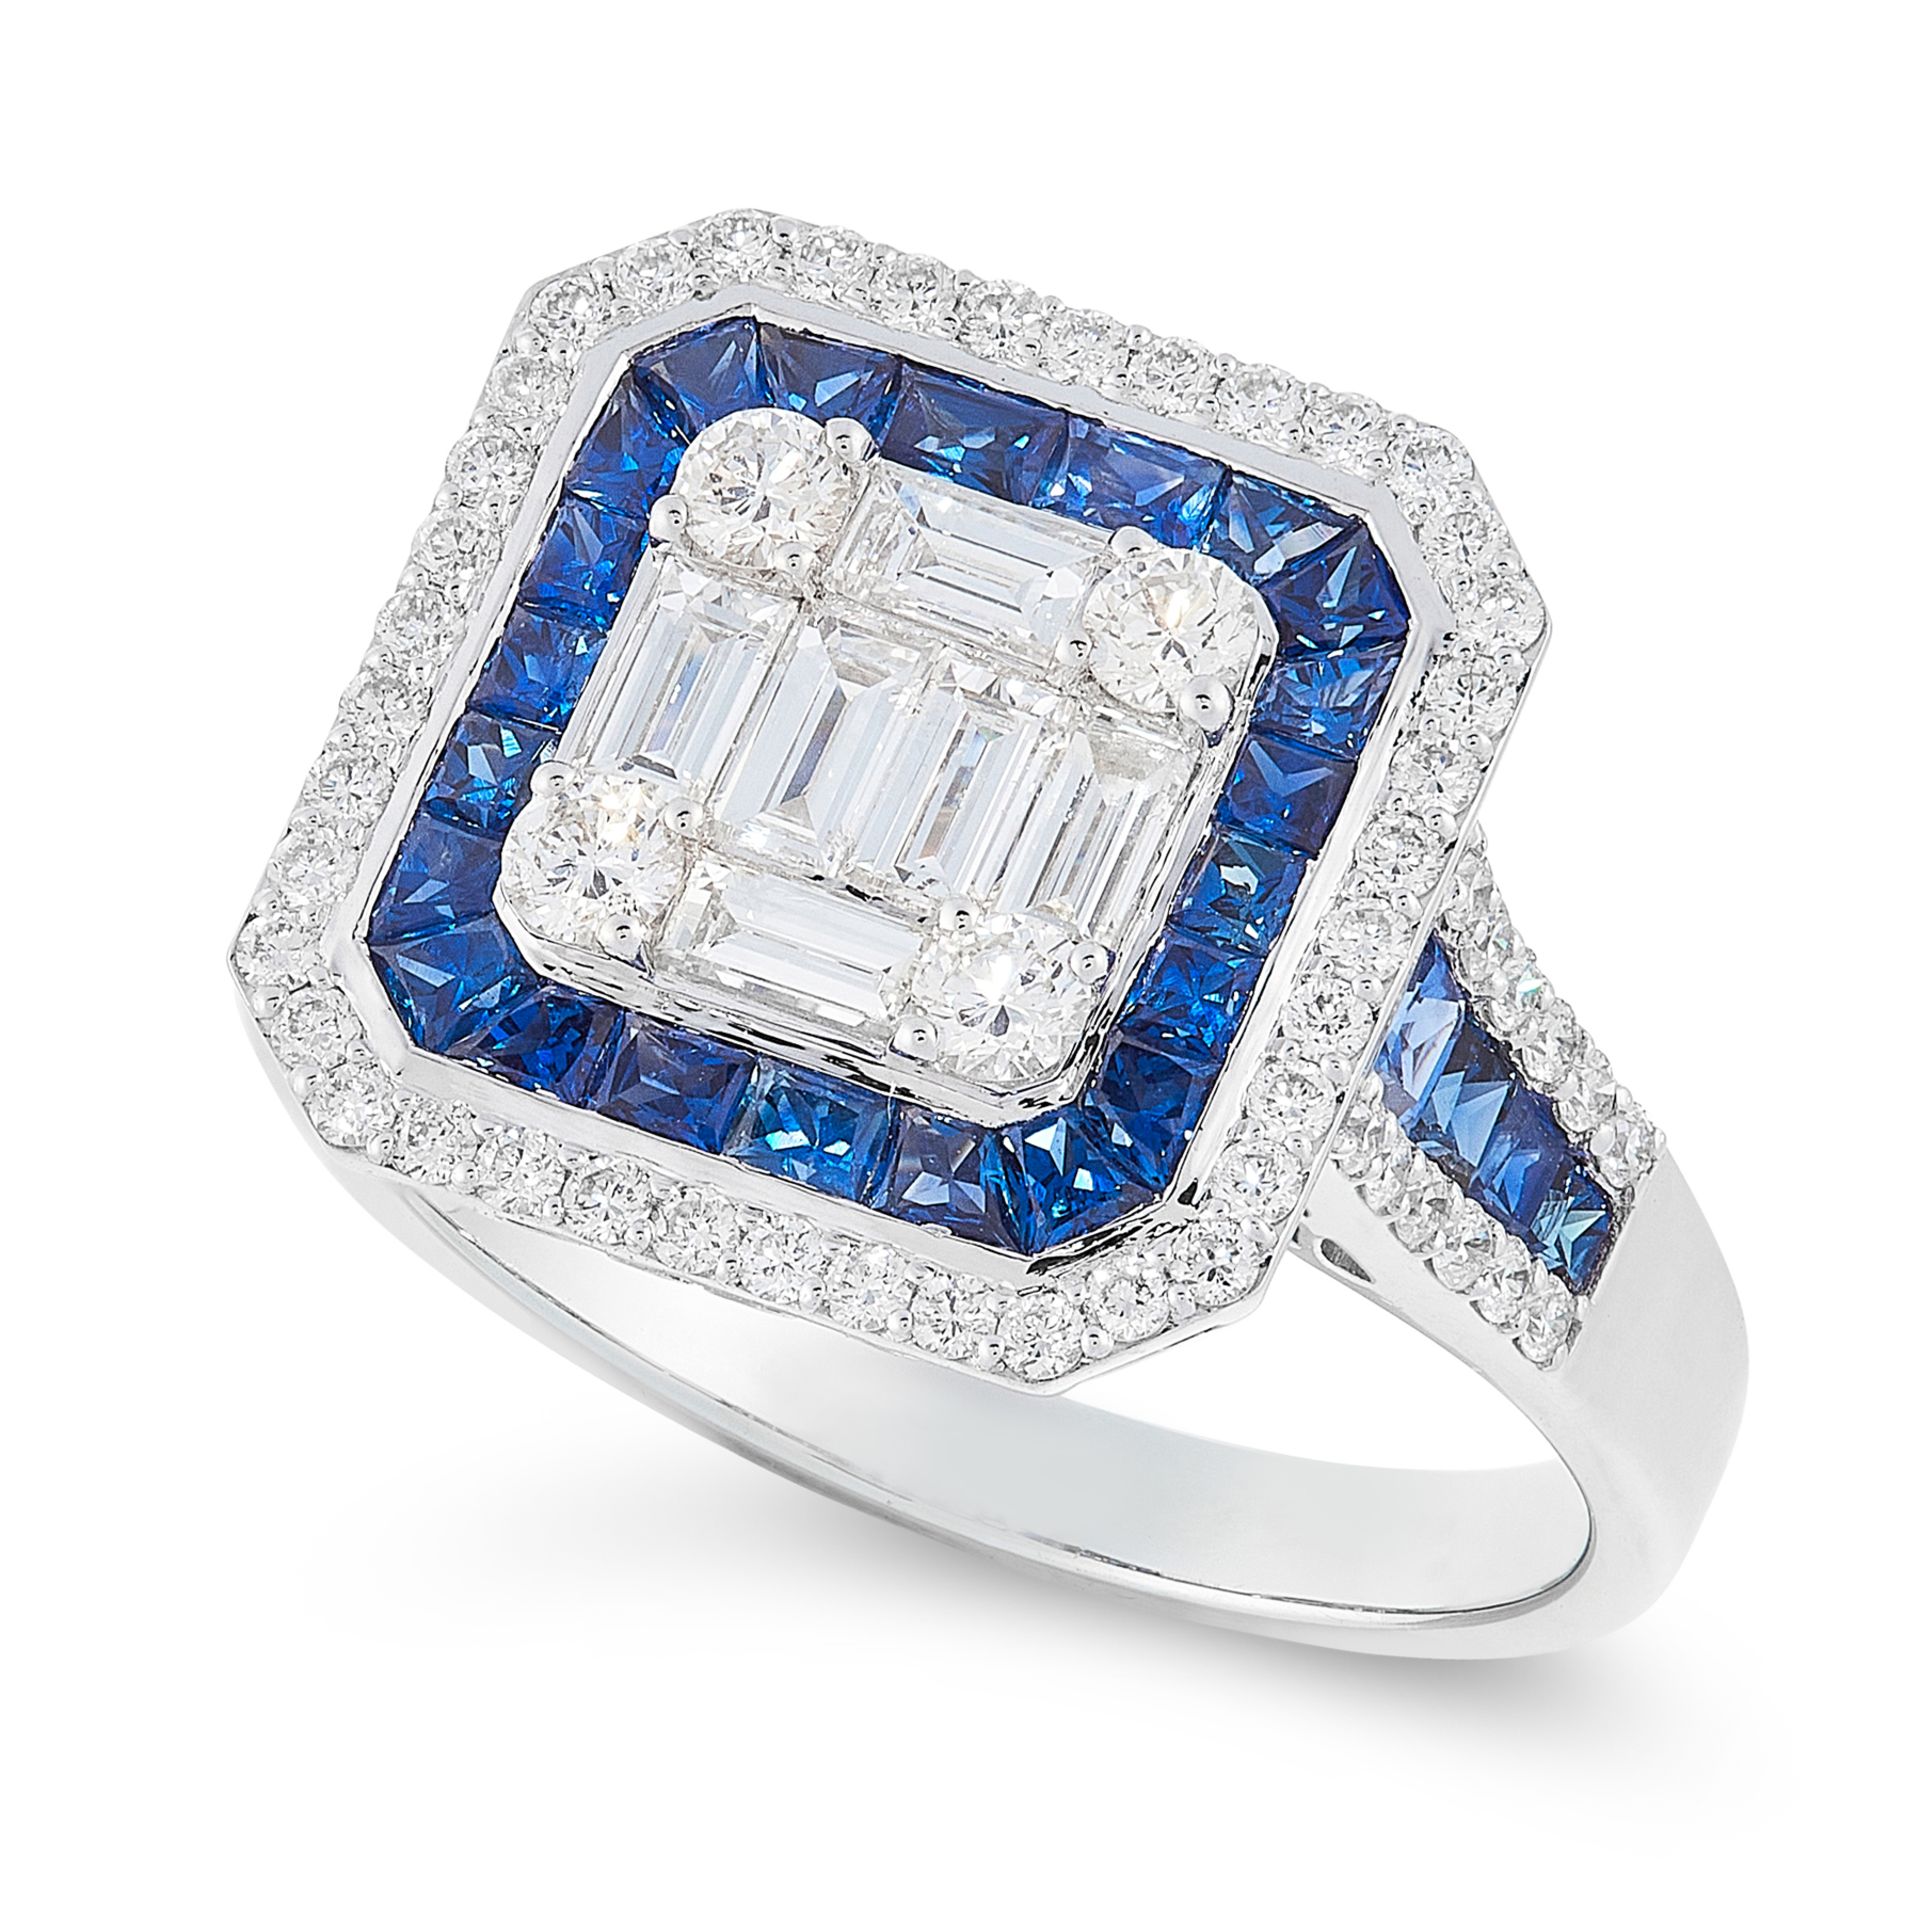 A SAPPHIRE AND DIAMOND DRESS RING in 18ct white gold, the rectangular face set with a central